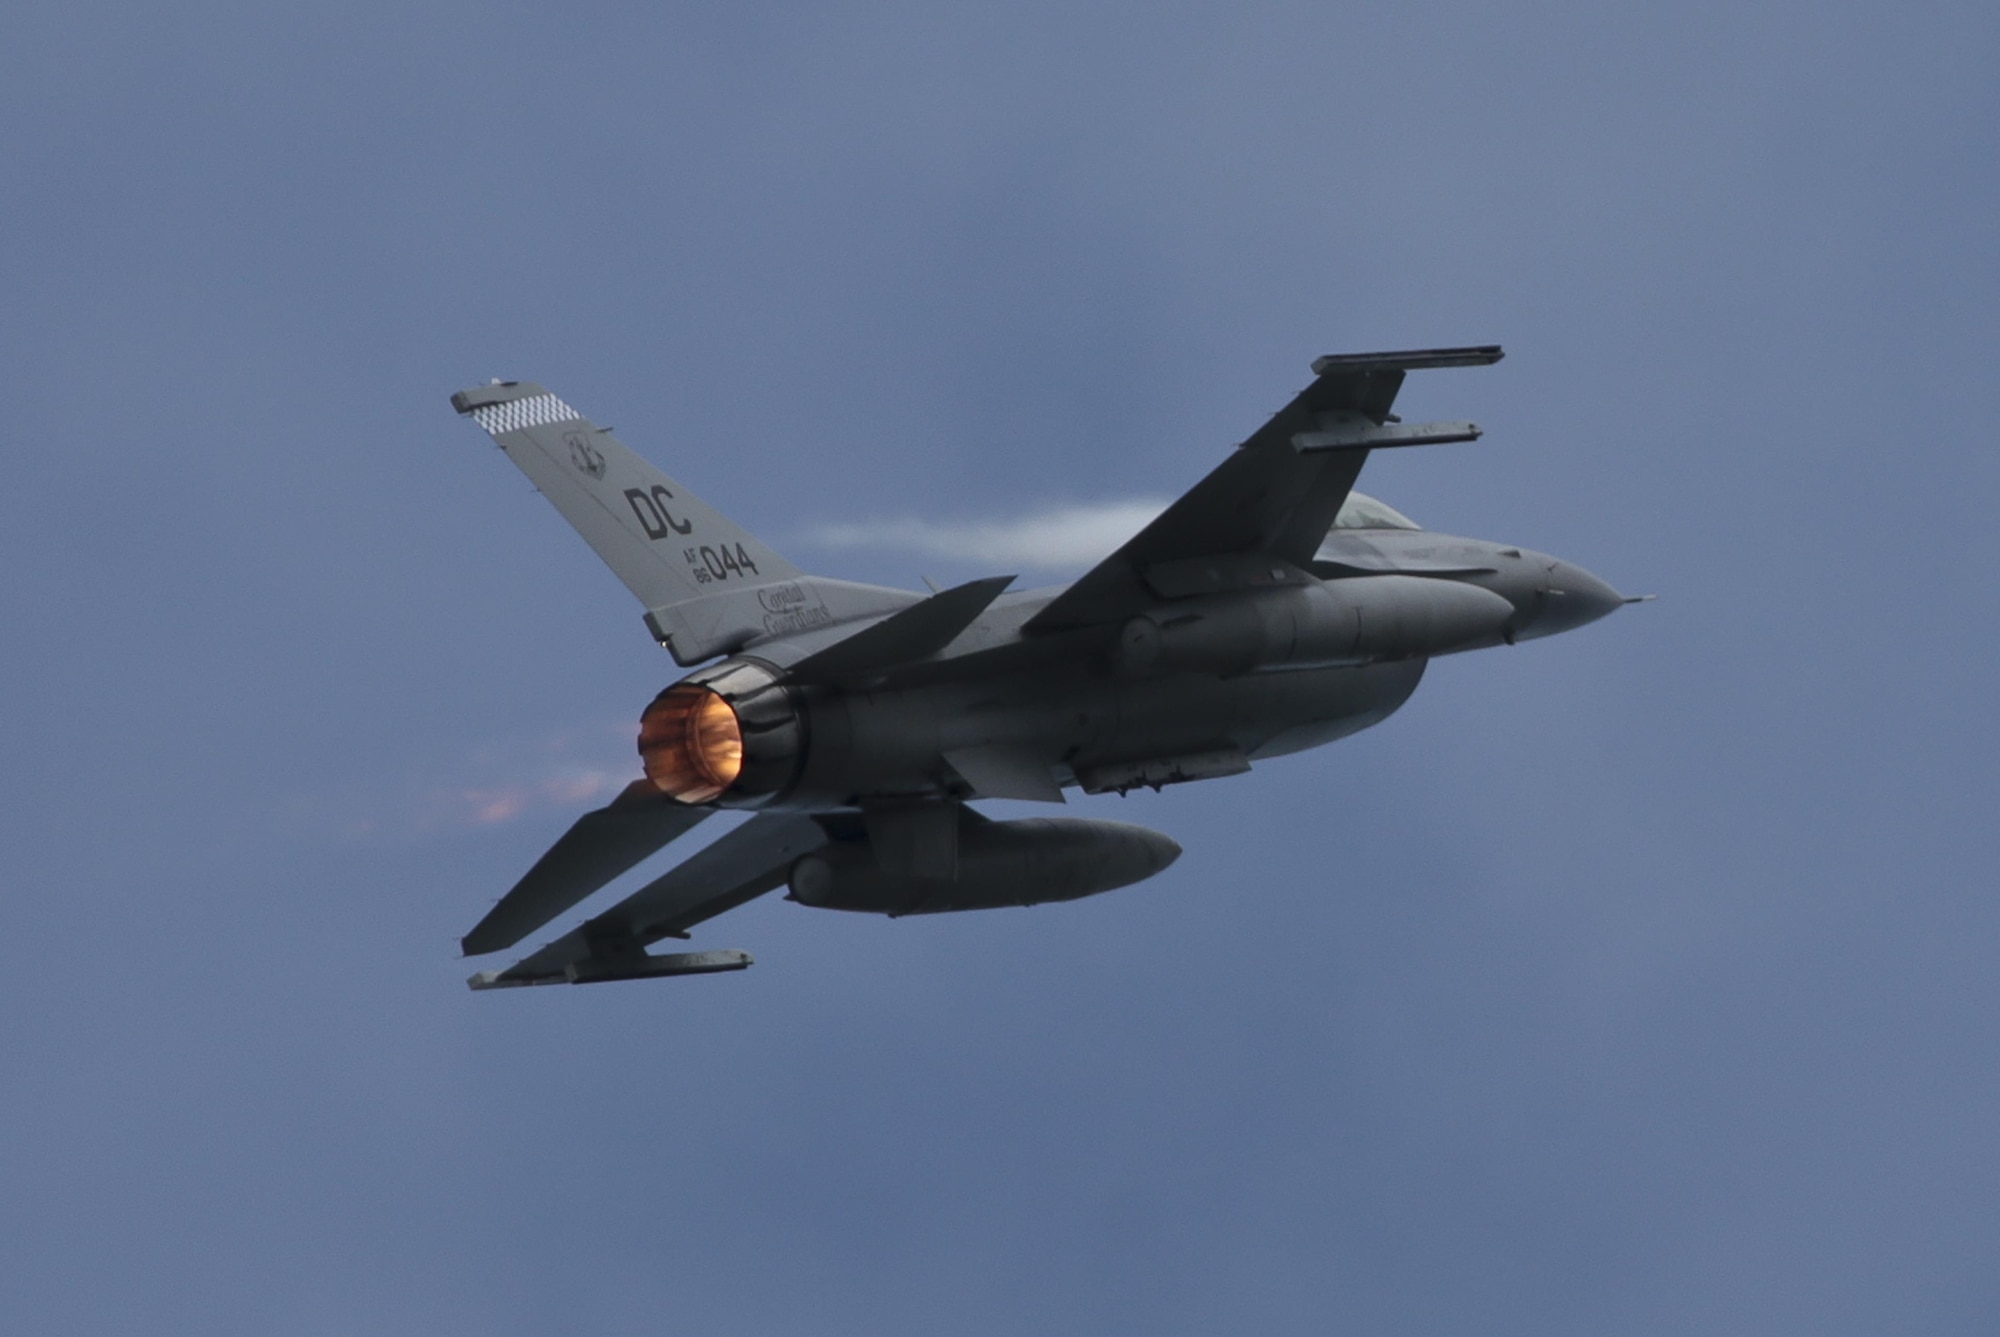 A District of Columbia Air National Guard F-16D Fighting Falcon from the 113th Fighter Wing takes off for a mission during a three-day Aeropsace Control Alert CrossTell live-fly training exercise at Atlantic City Air National Guard Base, N.J., May 24, 2017. Representatives from the Air National Guard fighter wings, Civil Air Patrol, and U.S. Coast Guard rotary-wing air intercept units will conduct daily sorties from May 23-25 to hone their skills with tactical-level air-intercept procedures. (U.S. Air National Guard photo by Master Sgt. Matt Hecht/Released)